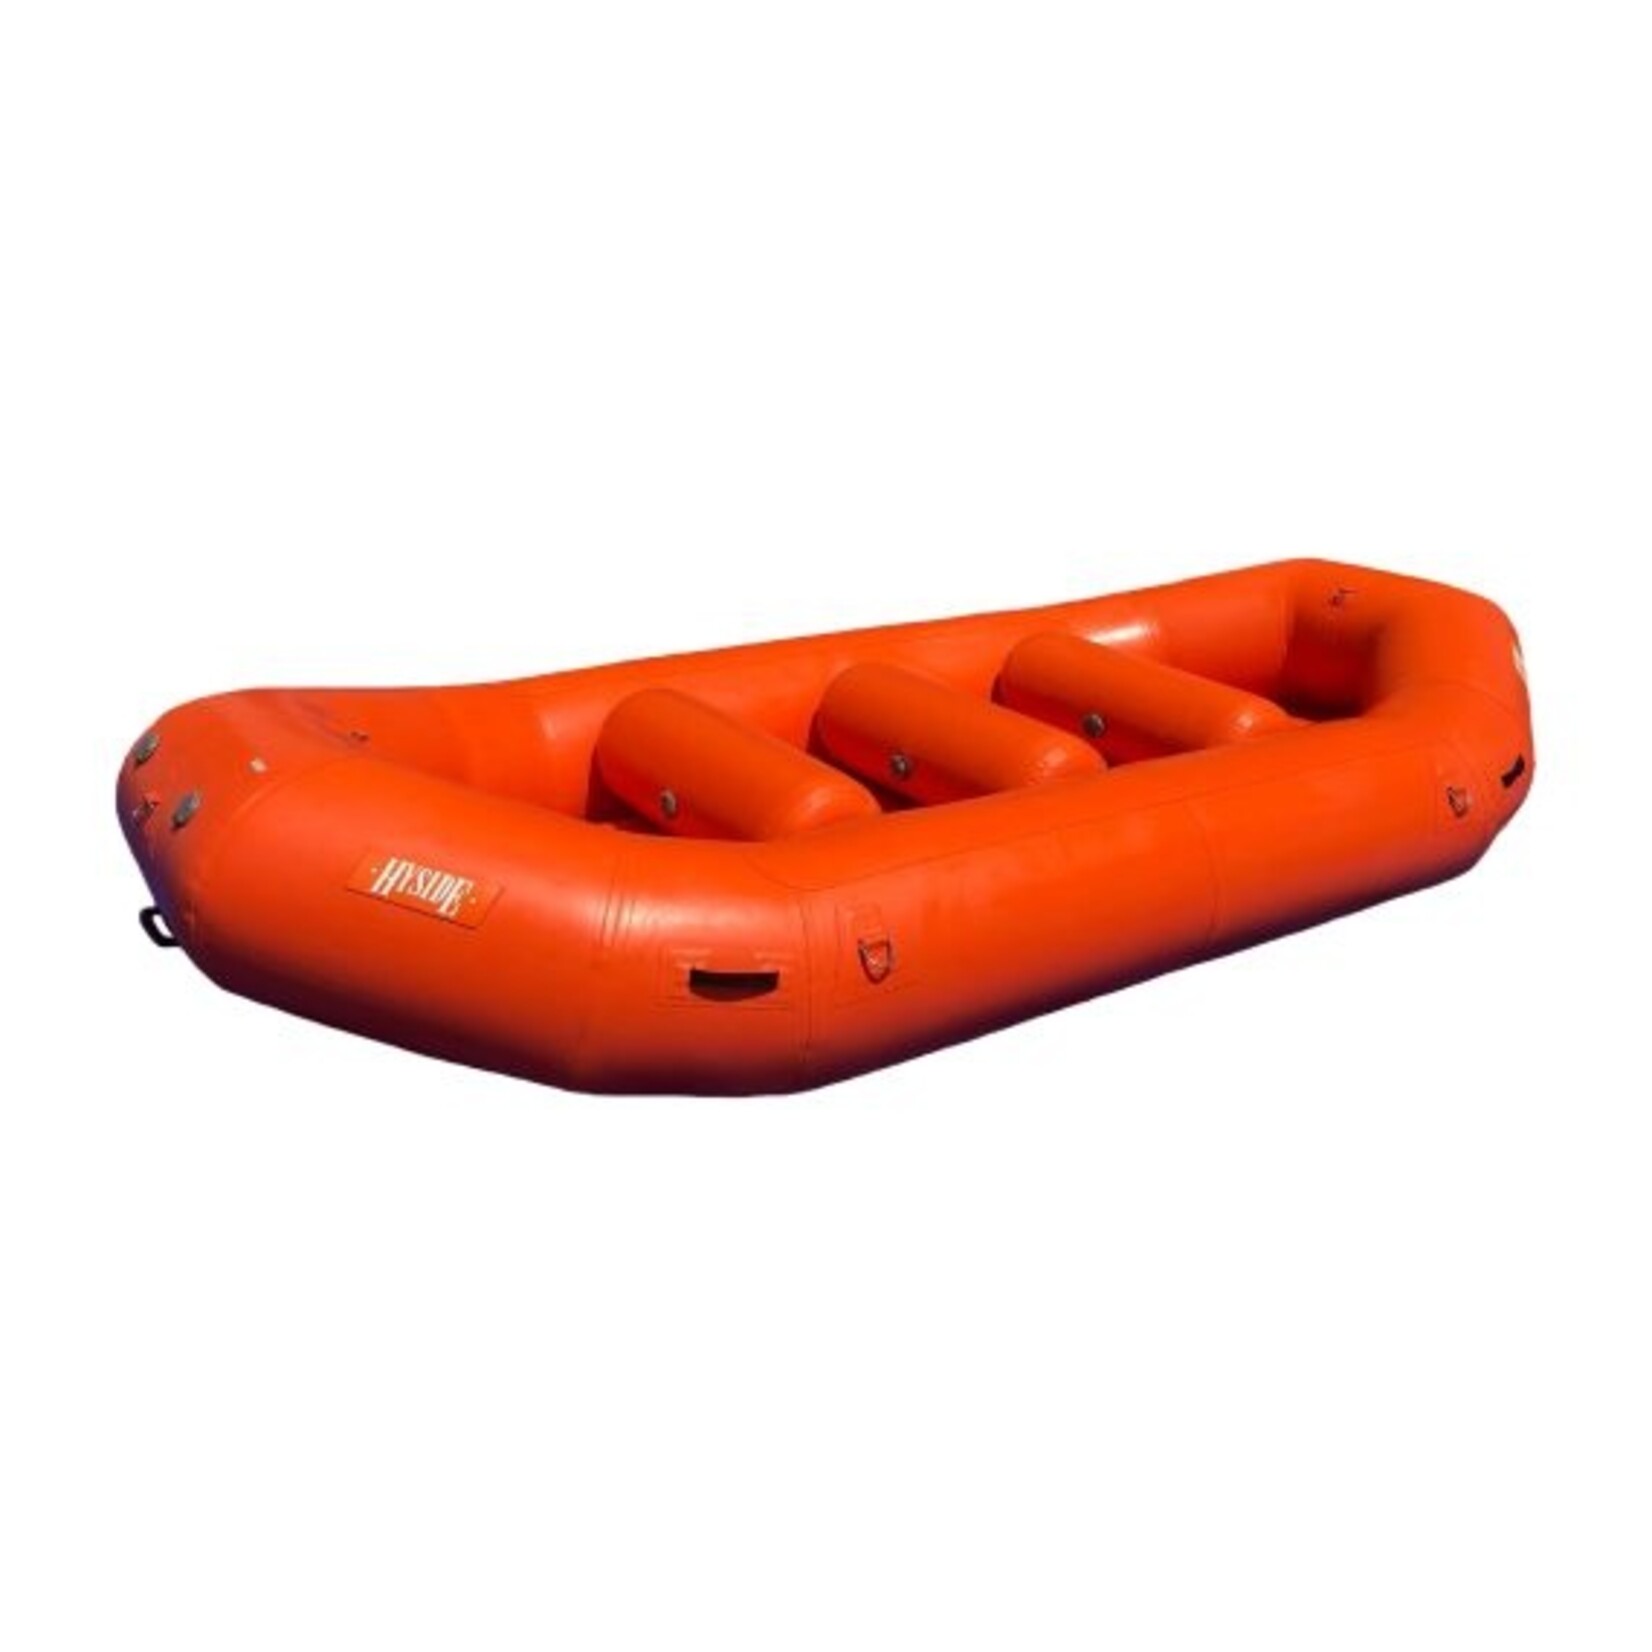 Hyside Inflatables Hyside Pro 13.0